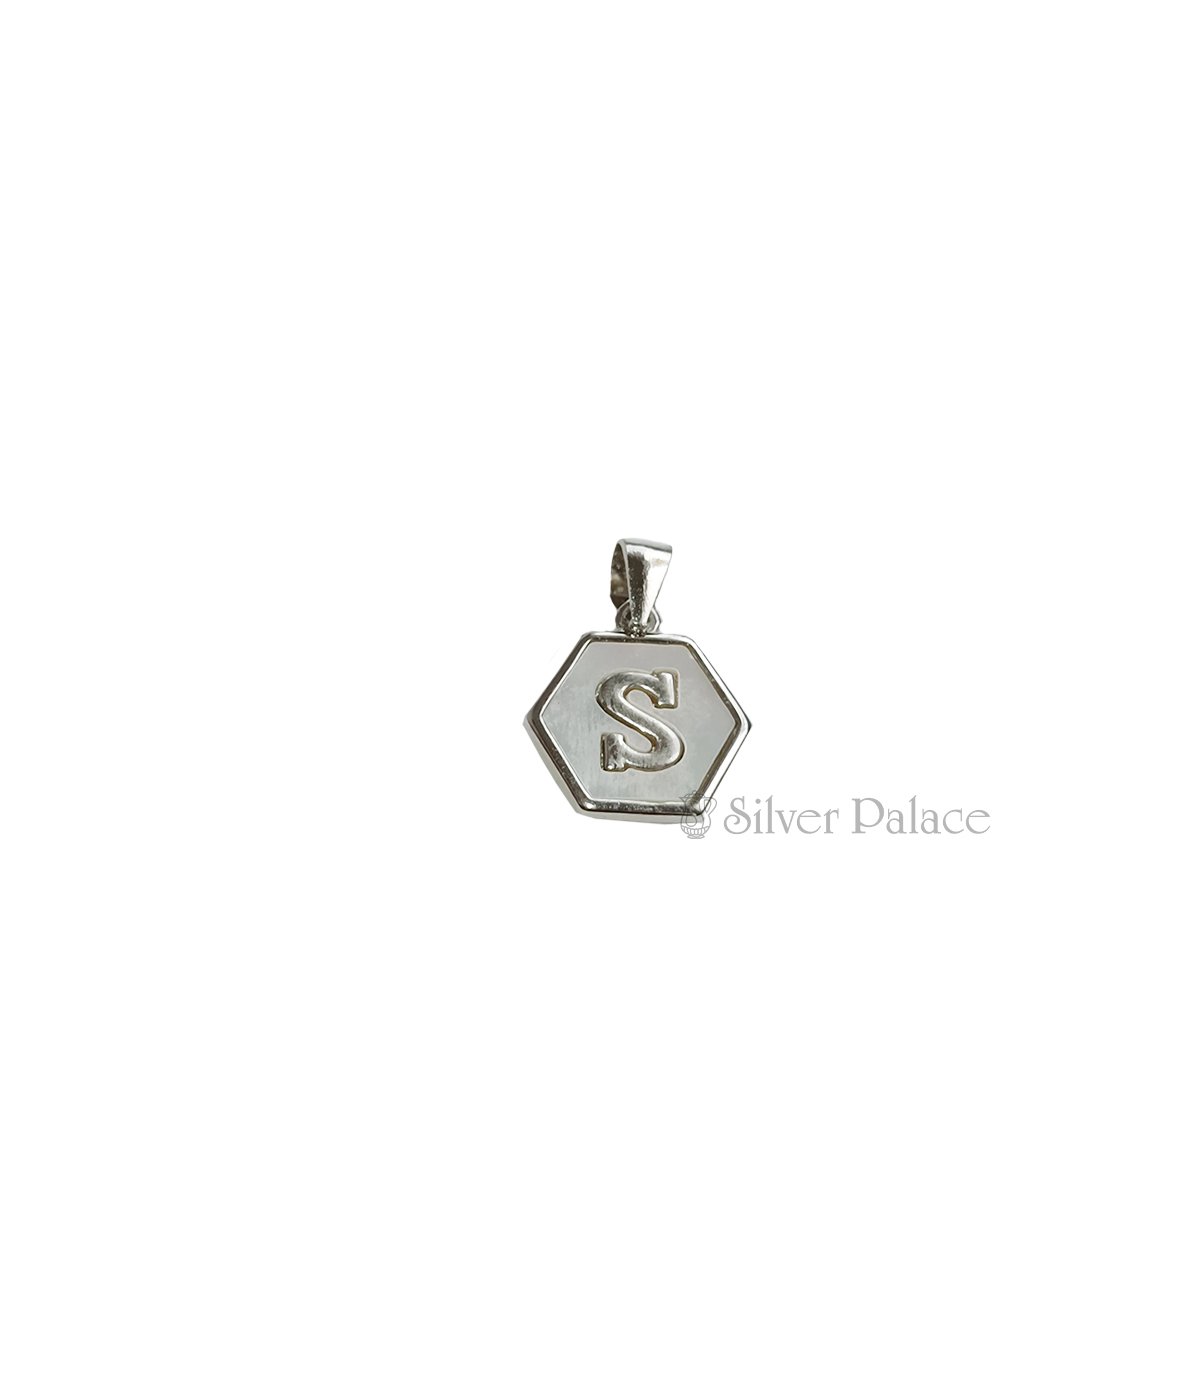 92.5 STERLING SILVER INITIAL LETTER S PENDANT